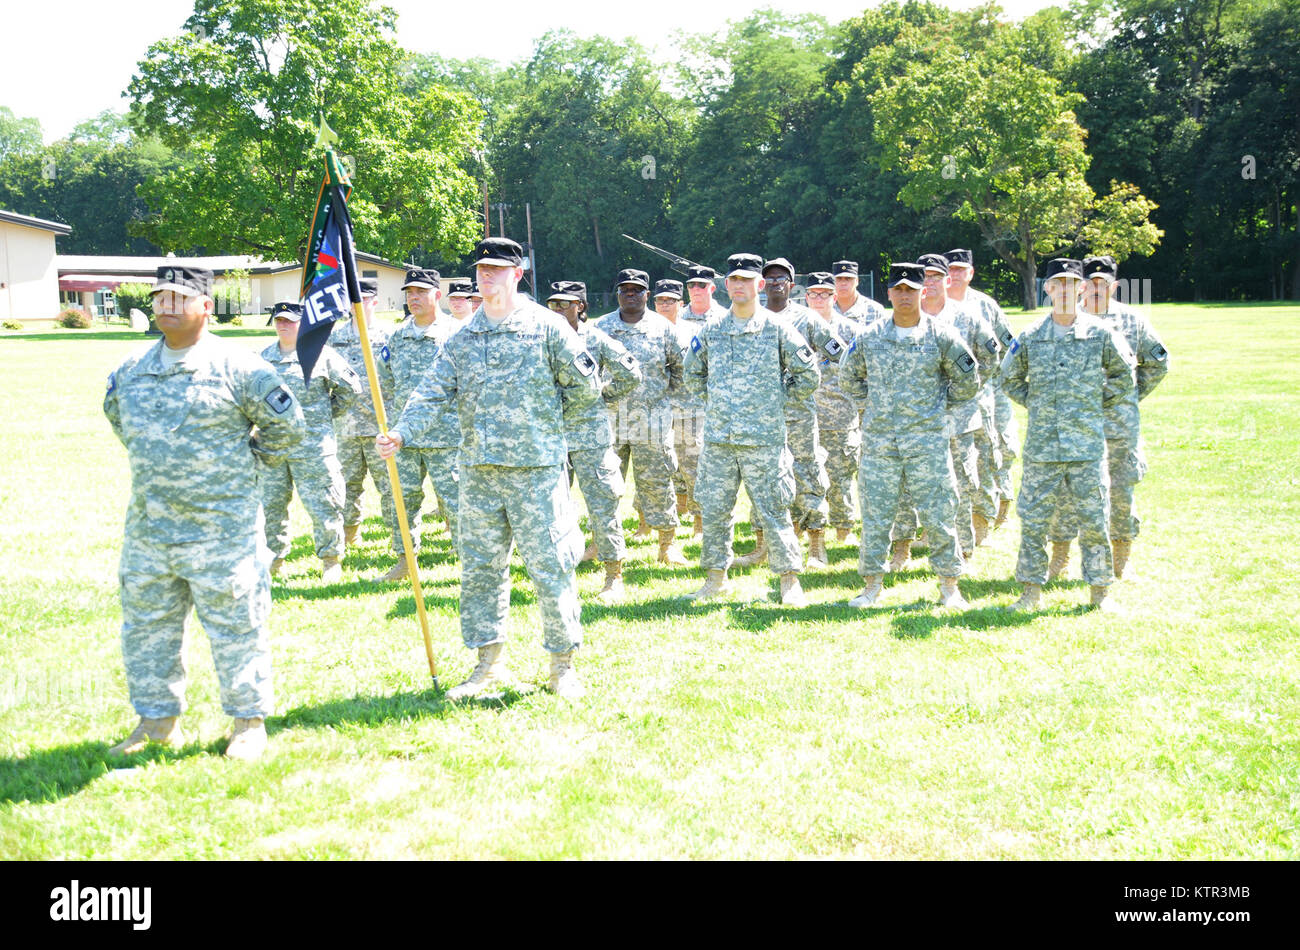 Camp Smith Training Site, Cortlandt Manor, NY – On August 20th, 2016 the New York Guard completed their week long annual training with graduation ceremonies  for the soldiers who completed their IET (Initial Entry Training) course, Basic Officers Course, Advanced MERN (Military Emergency Radio Network )communications course and Mess Operations Course.    After receiving their course completion certifications, over 350 soldiers from the New York Guard participated in a pass and review parade for the guest speaker, the New York Military Forces Deputy Adjutant General Brigadier General Raymond Sh Stock Photo